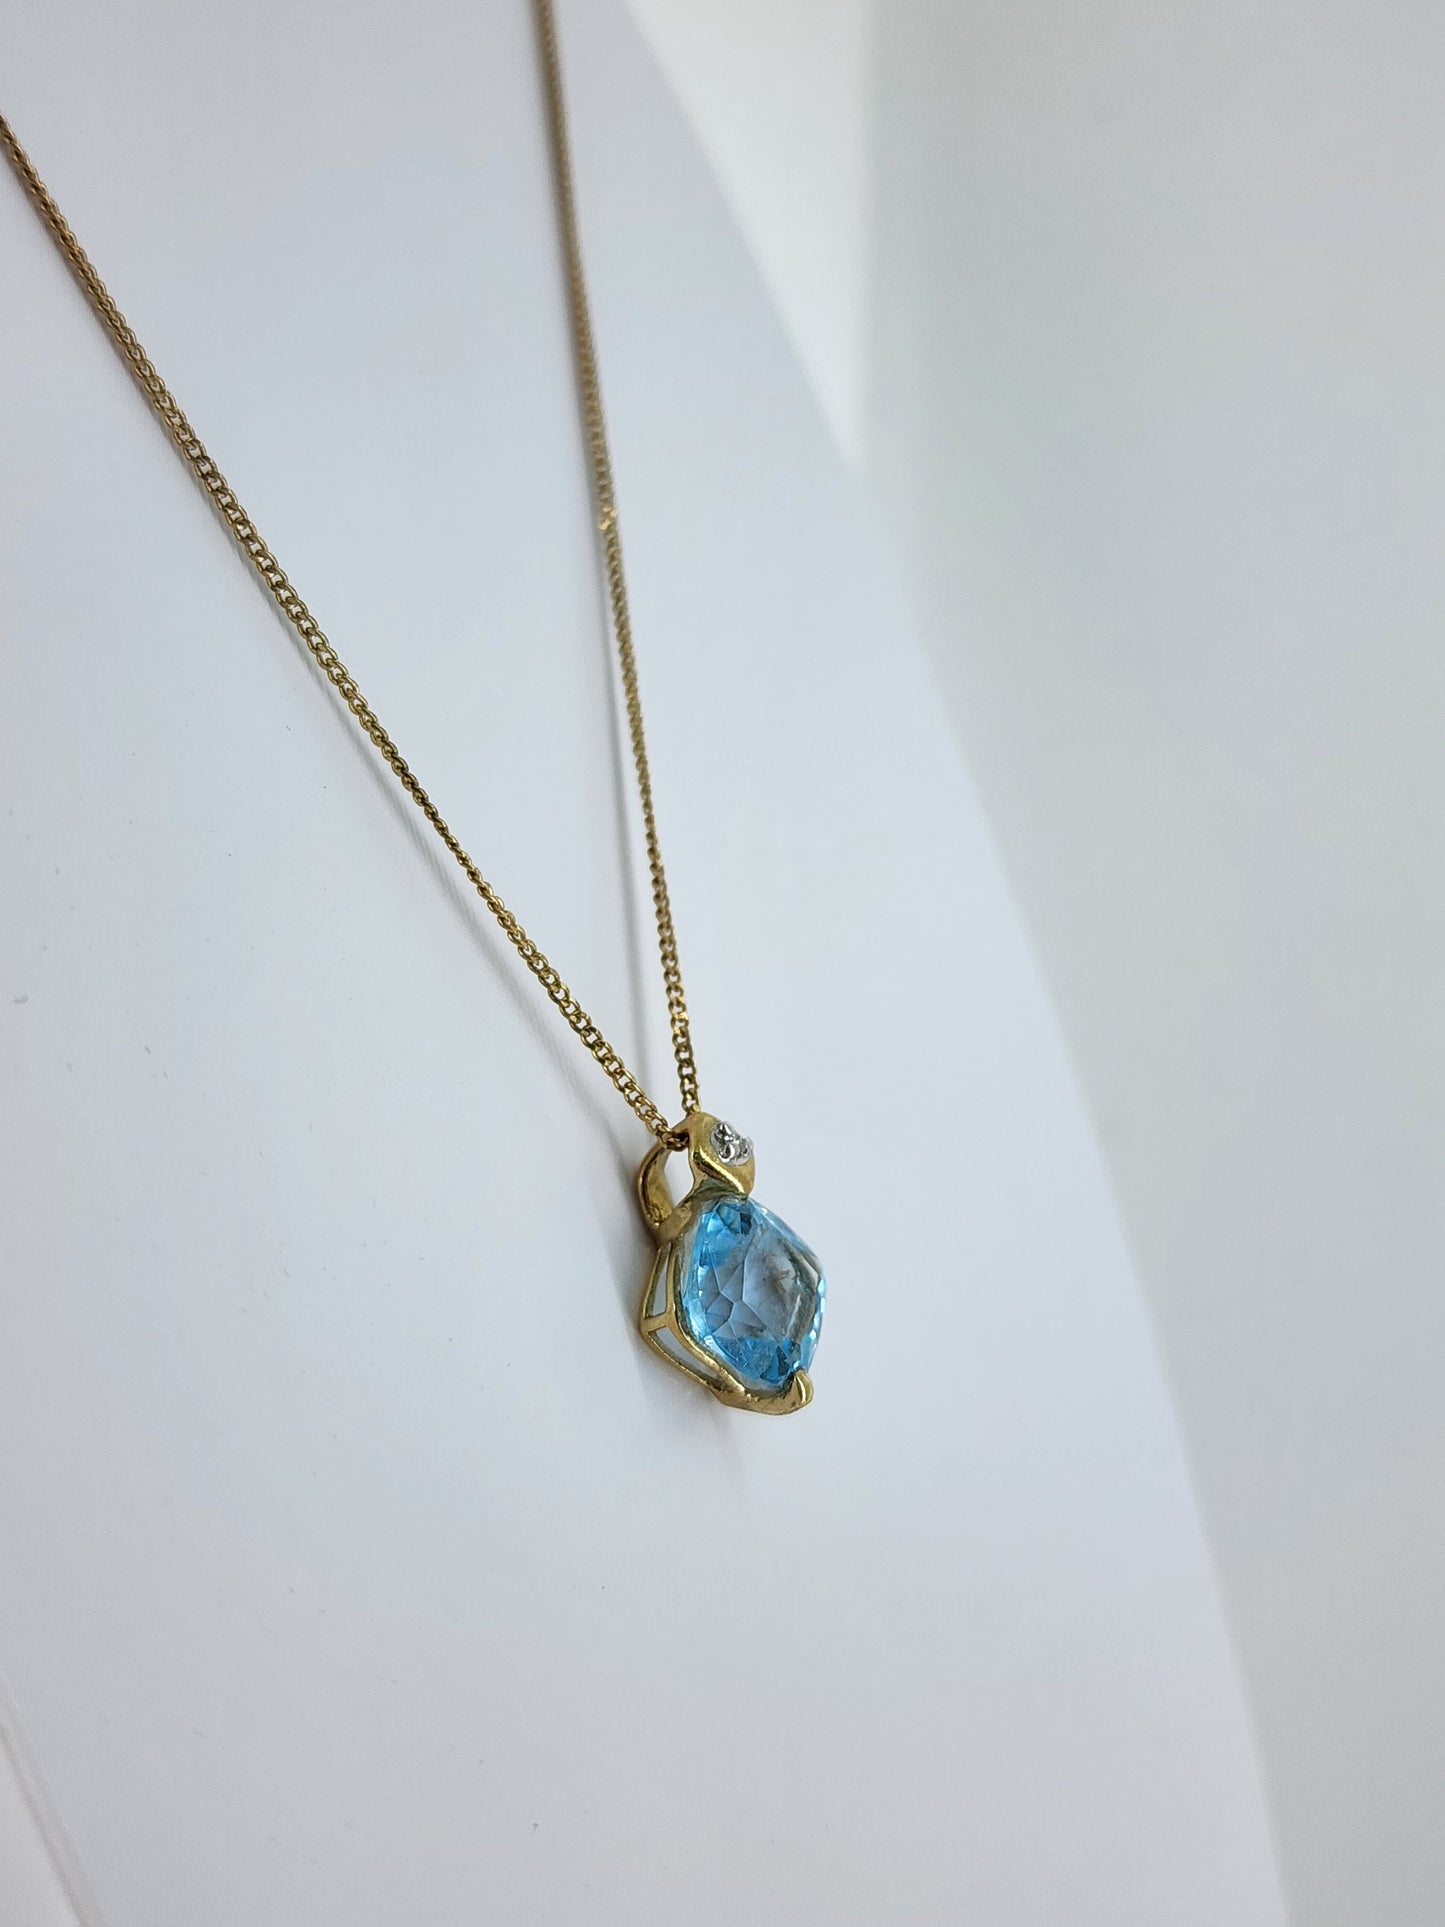 10K yellow gold diamond and blue topaz necklace 8510